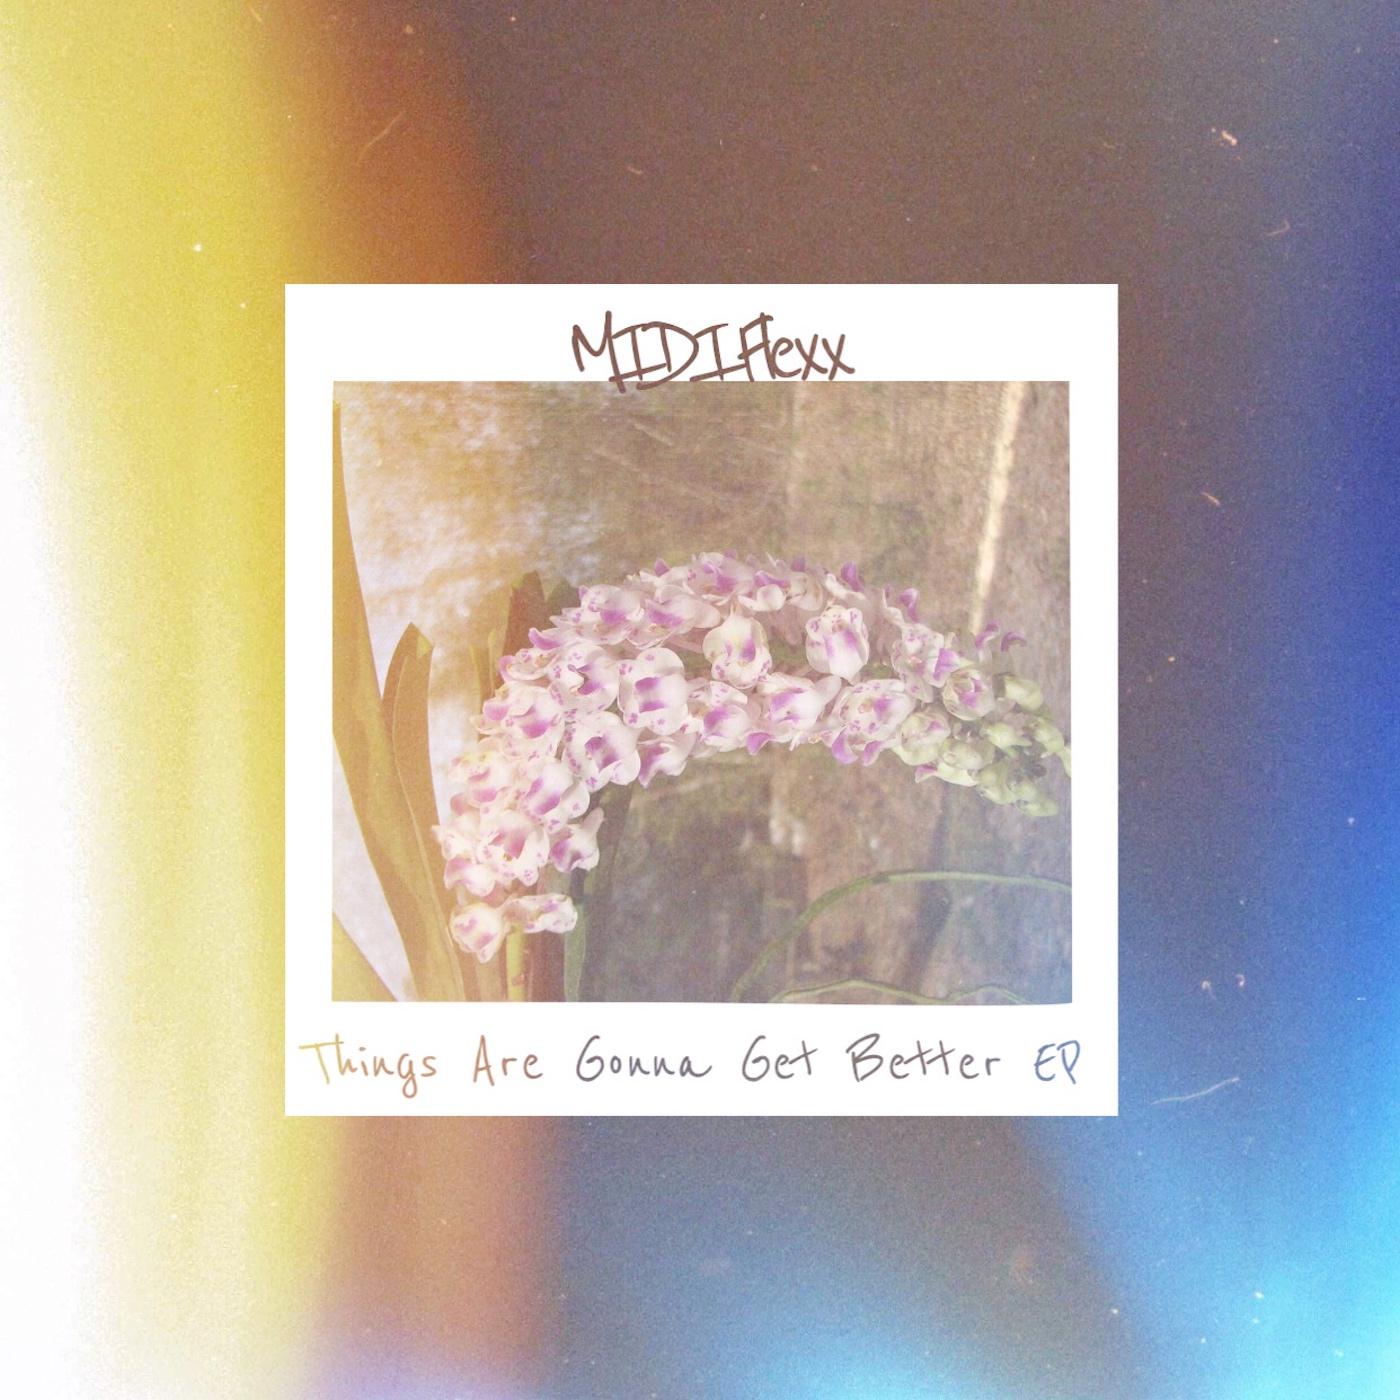 Things Are Gonna Get Better EP